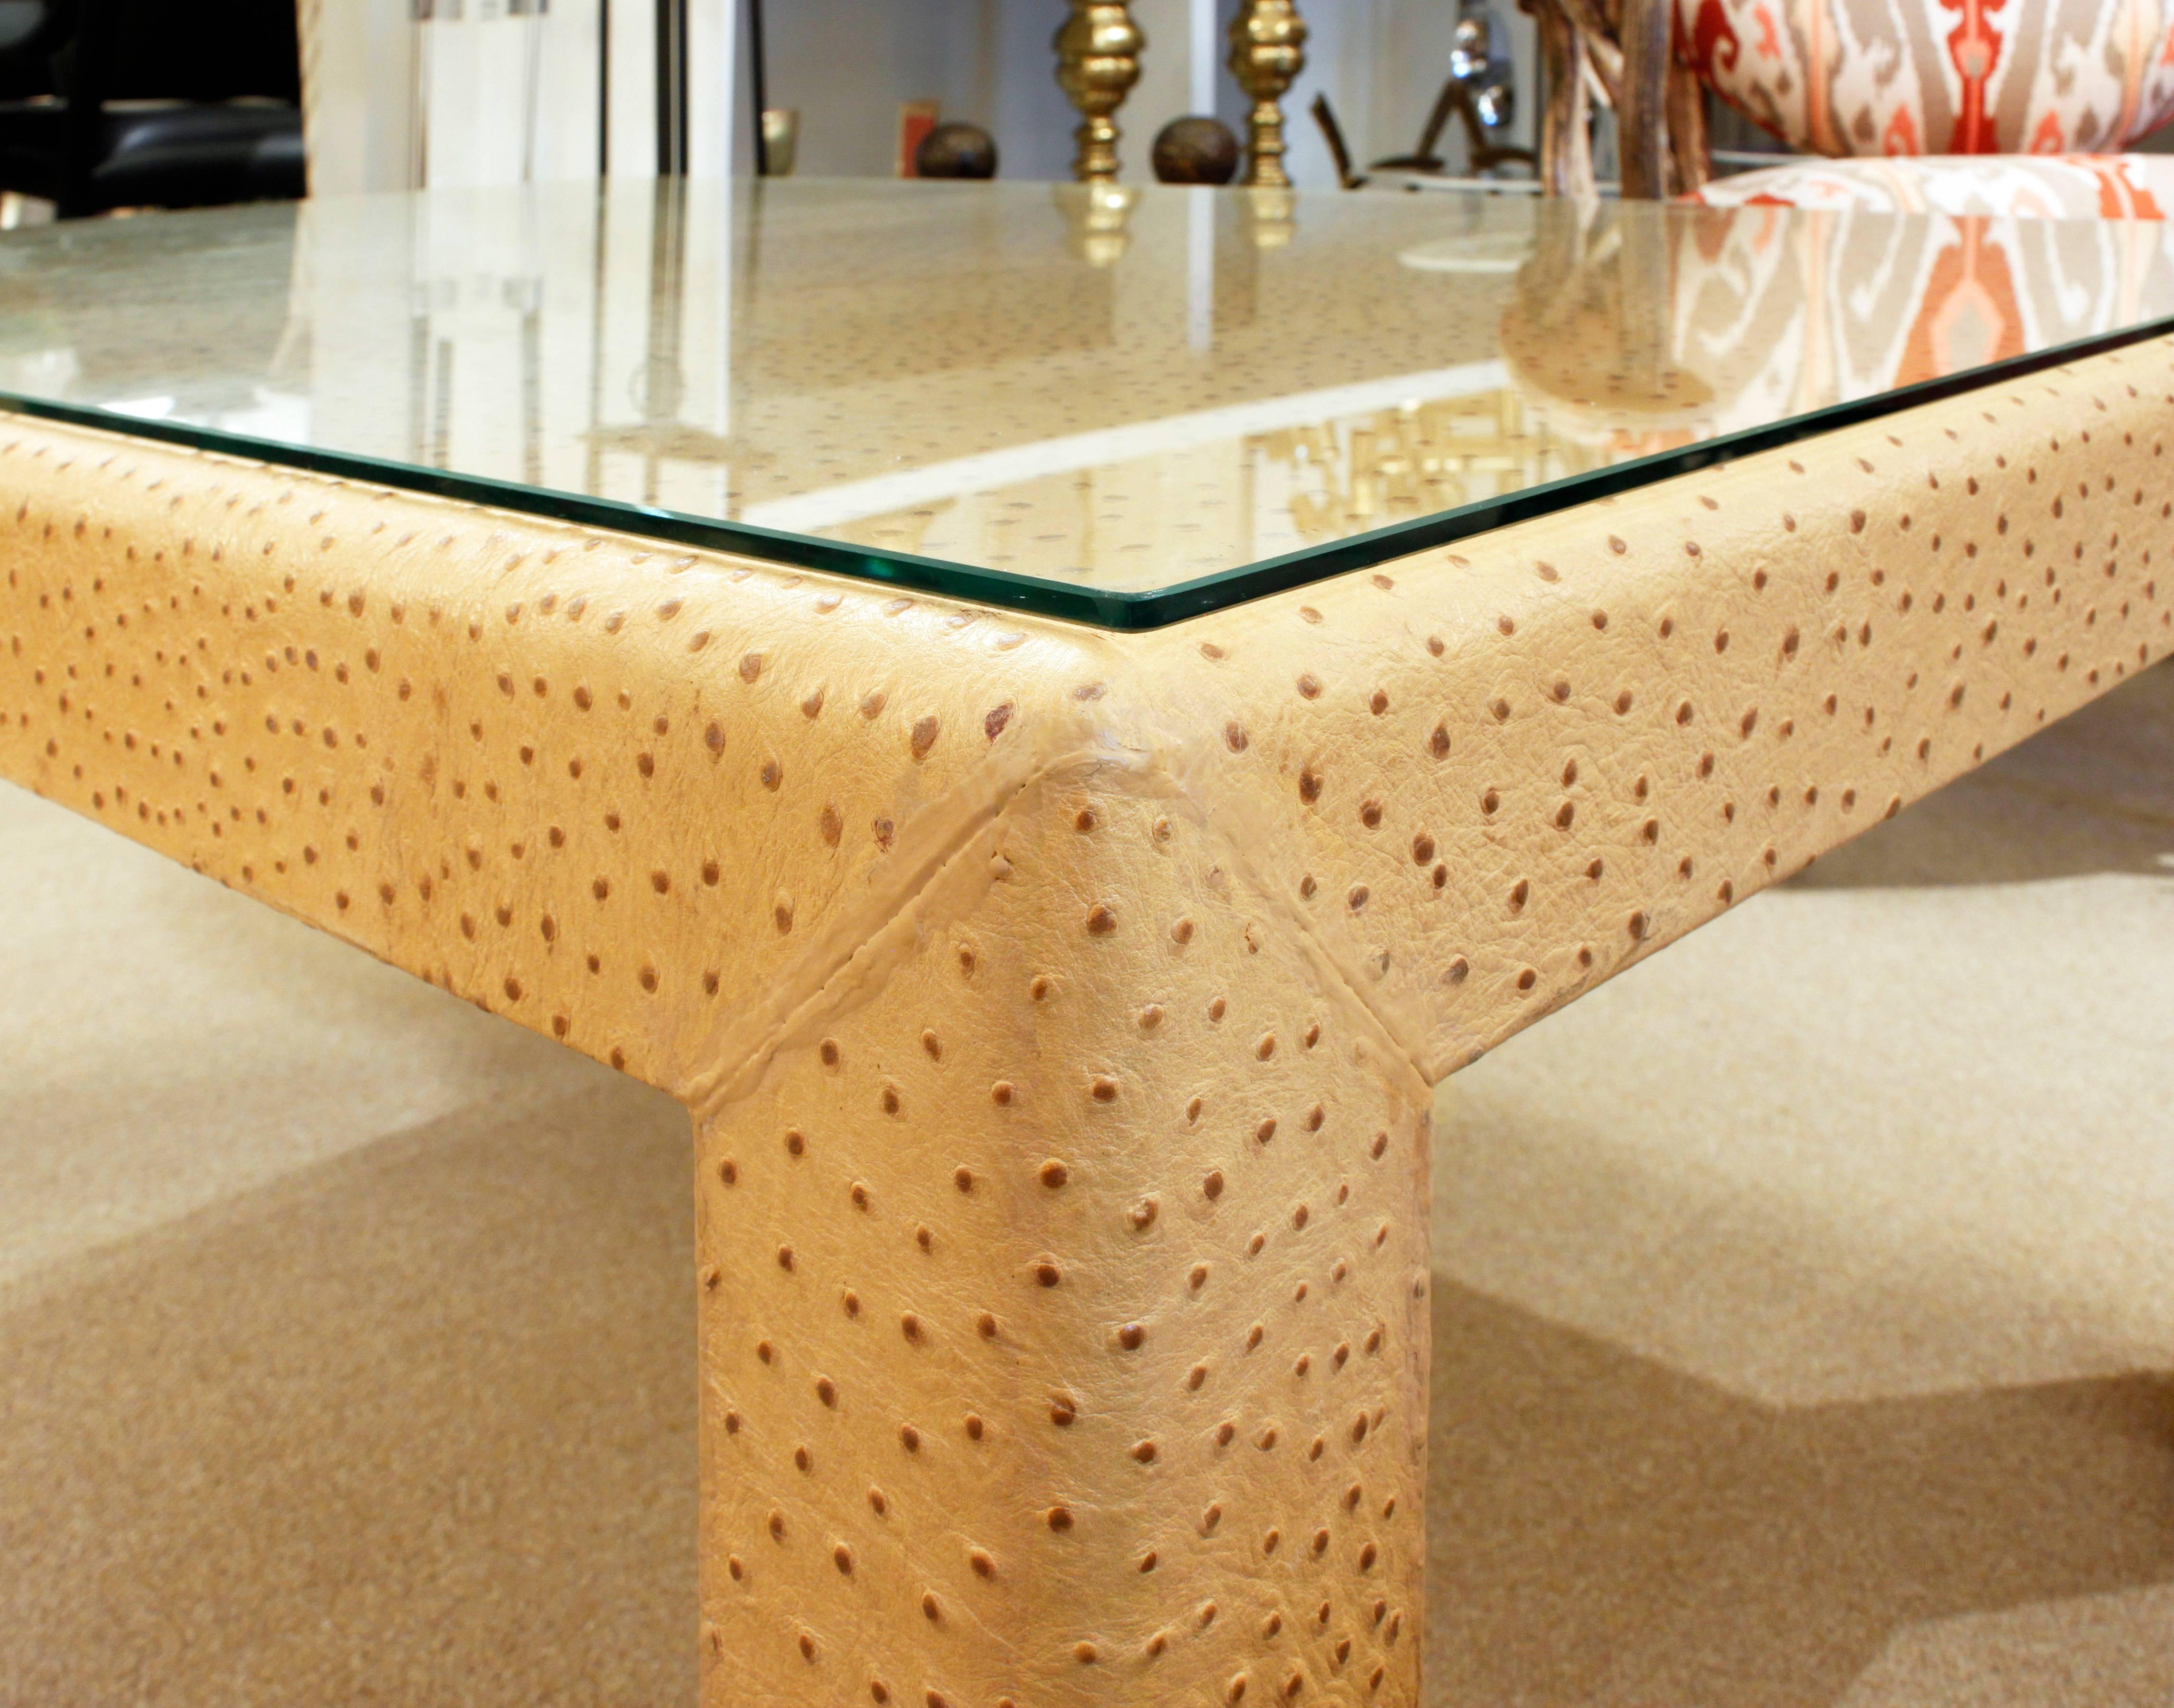 Elegant coffee table covered in ostrich skin with glass top by Karl Springer, American 1970's (signed with metal Karl Springer label on bottom).  This table is a beautiful example of Springer’s superb craftsmanship.
 